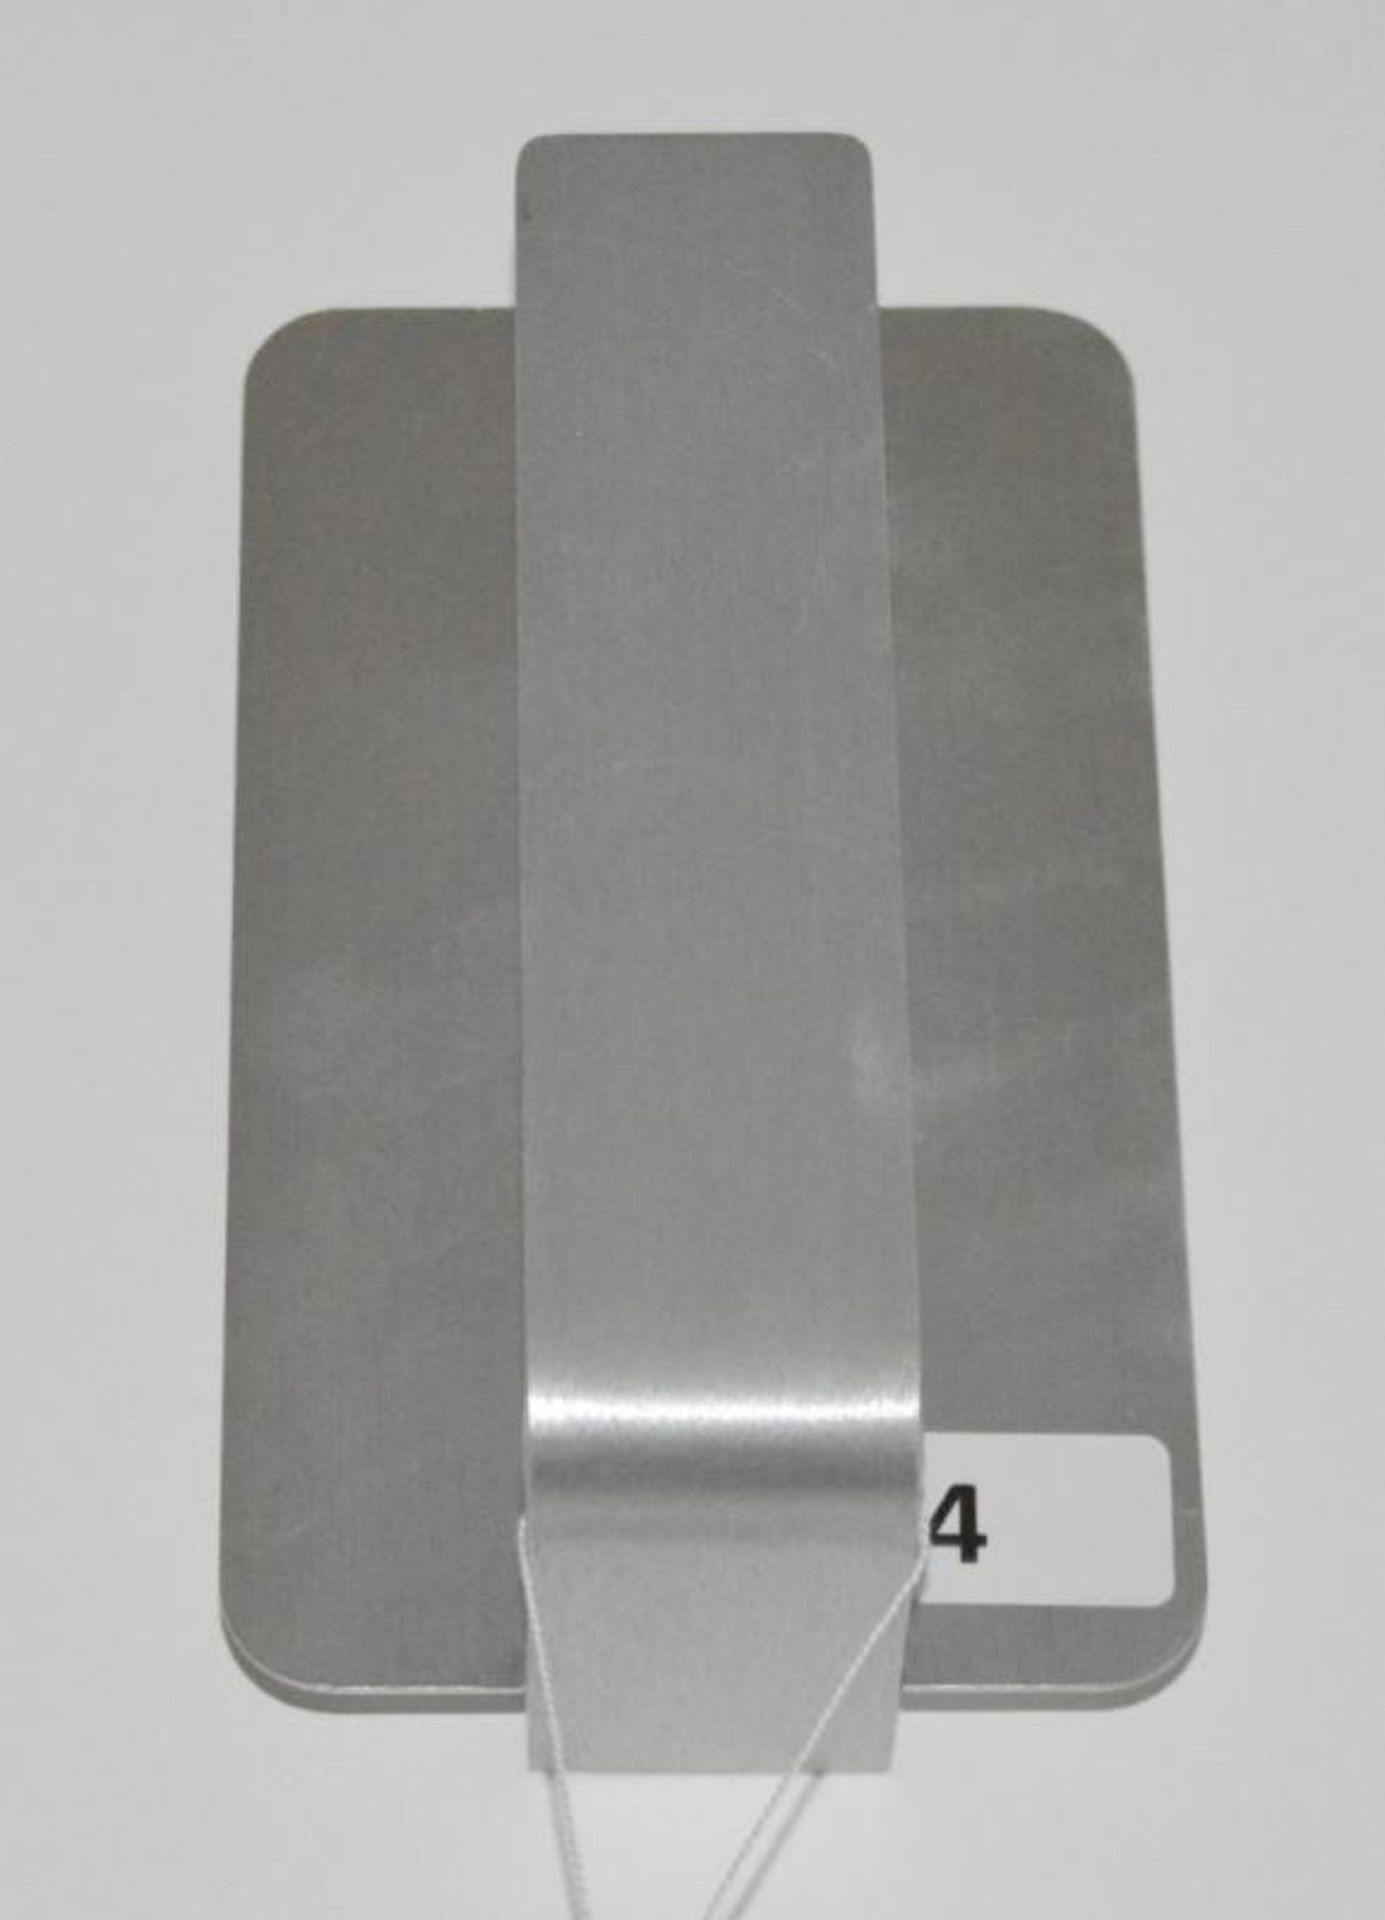 1 x Brushed Aluminium LED 5w Wall Light - Contemporary Design - Ex Display Stock - CL298 - Ref 4 - L - Image 2 of 4